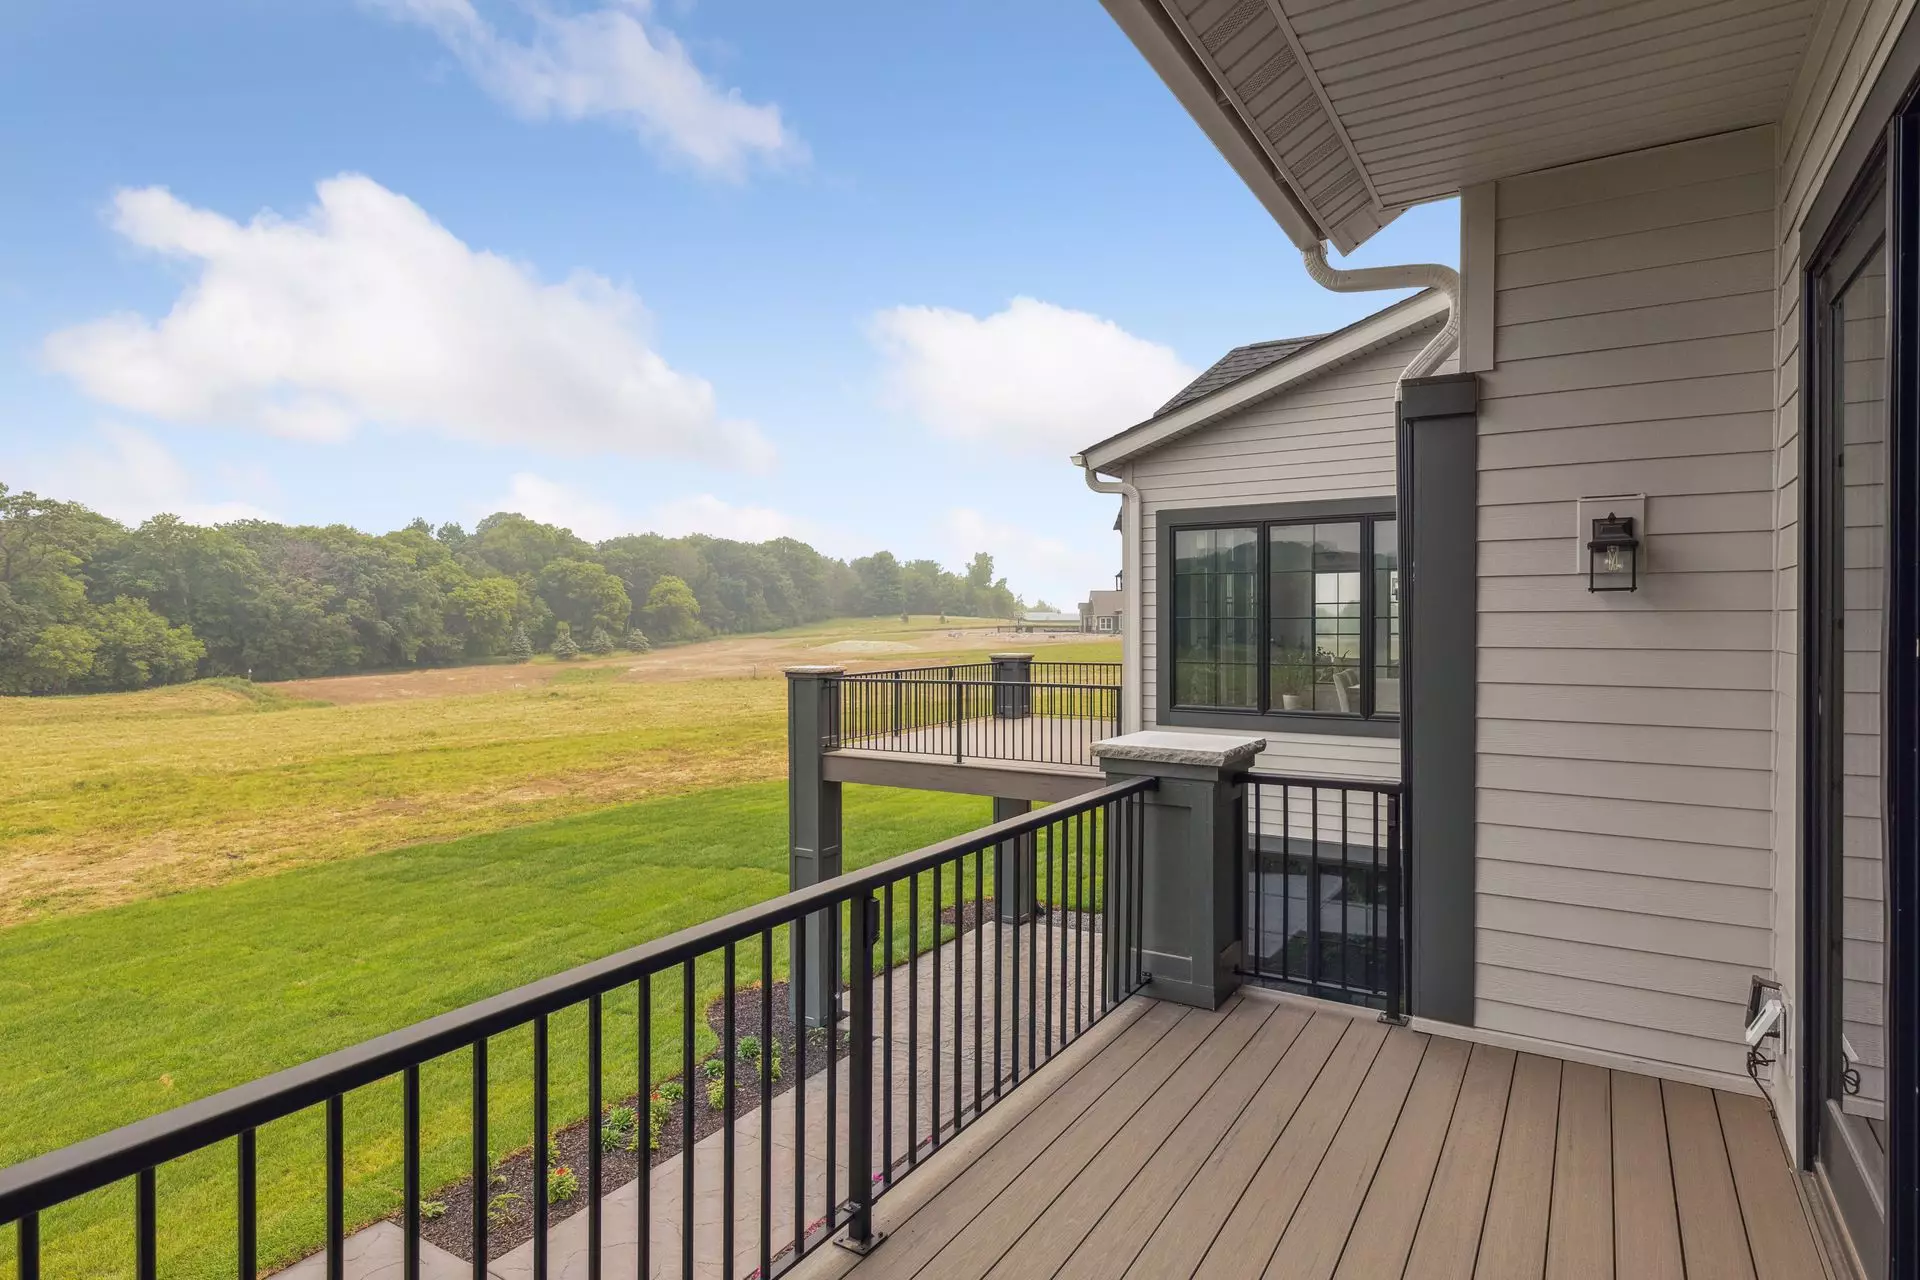 2 decks to take in some of the best views in Afton Creek Preserve